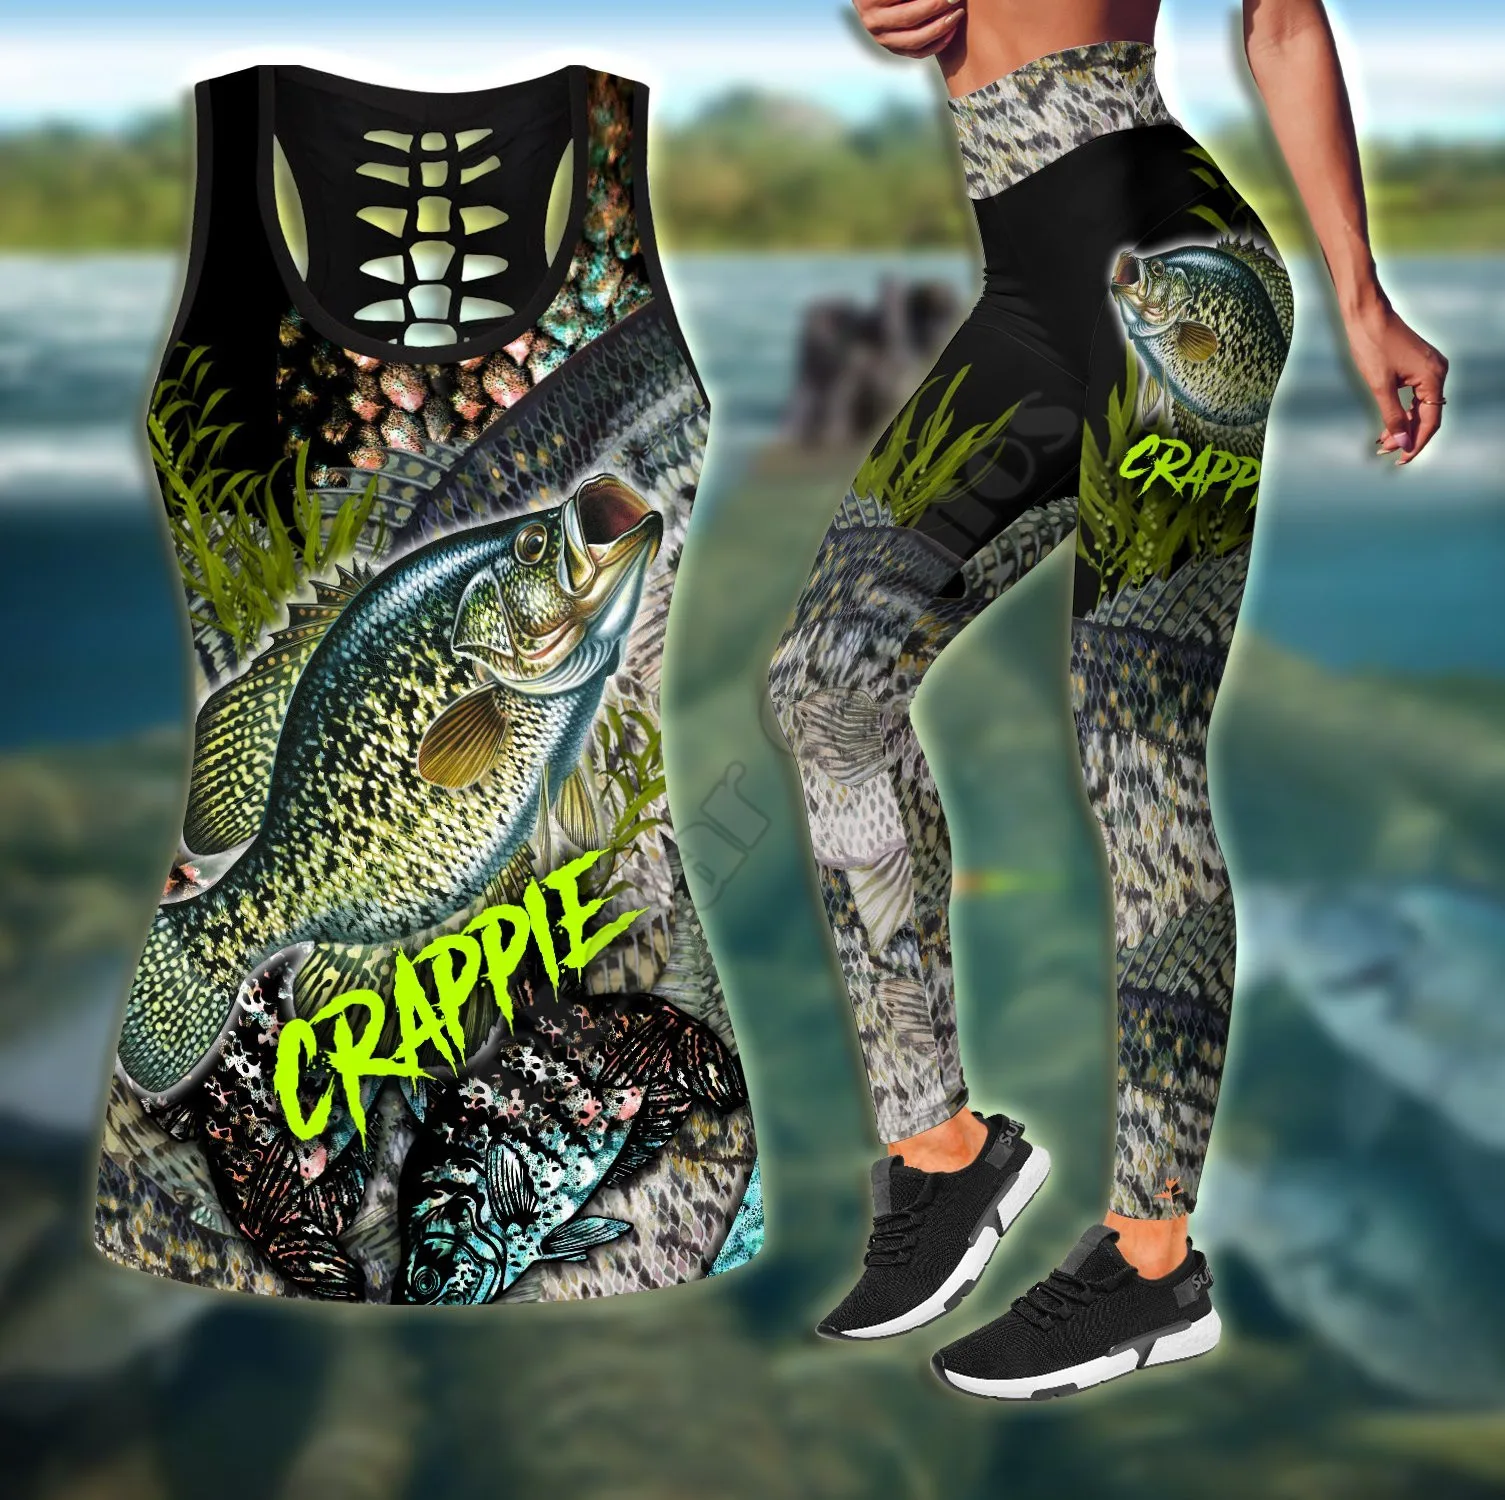 

Crappie Fishing On Skin Beautiful Camo 3D Printed Tank Top+Legging Combo Outfit Yoga Fitness Soft Legging Summer Women For Girl